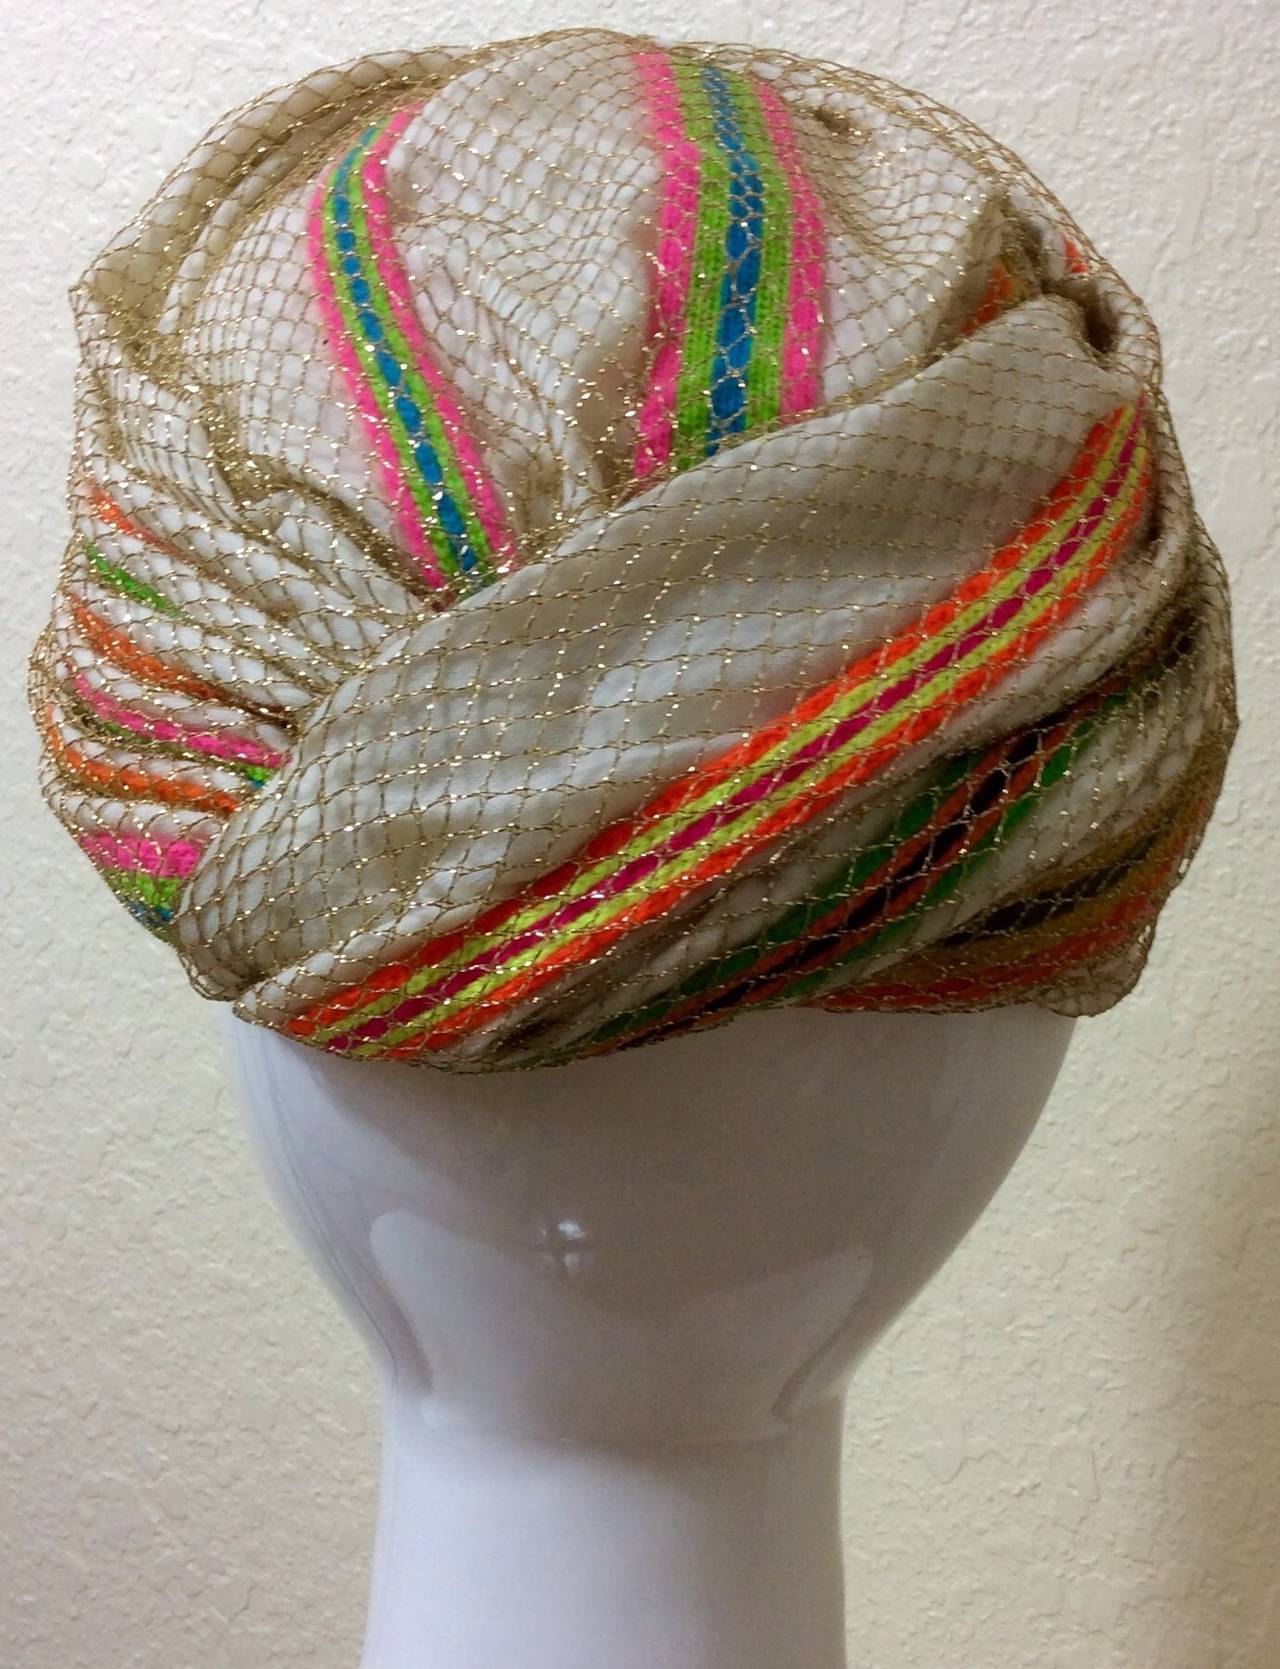 This magnificent turban form Christian Dior chapeaux is ivory with rainbow braided and knit stripes throughout, and topped off with a layer of gold netting. The inside is fully lined. Excellent condition
The diameter is about 8